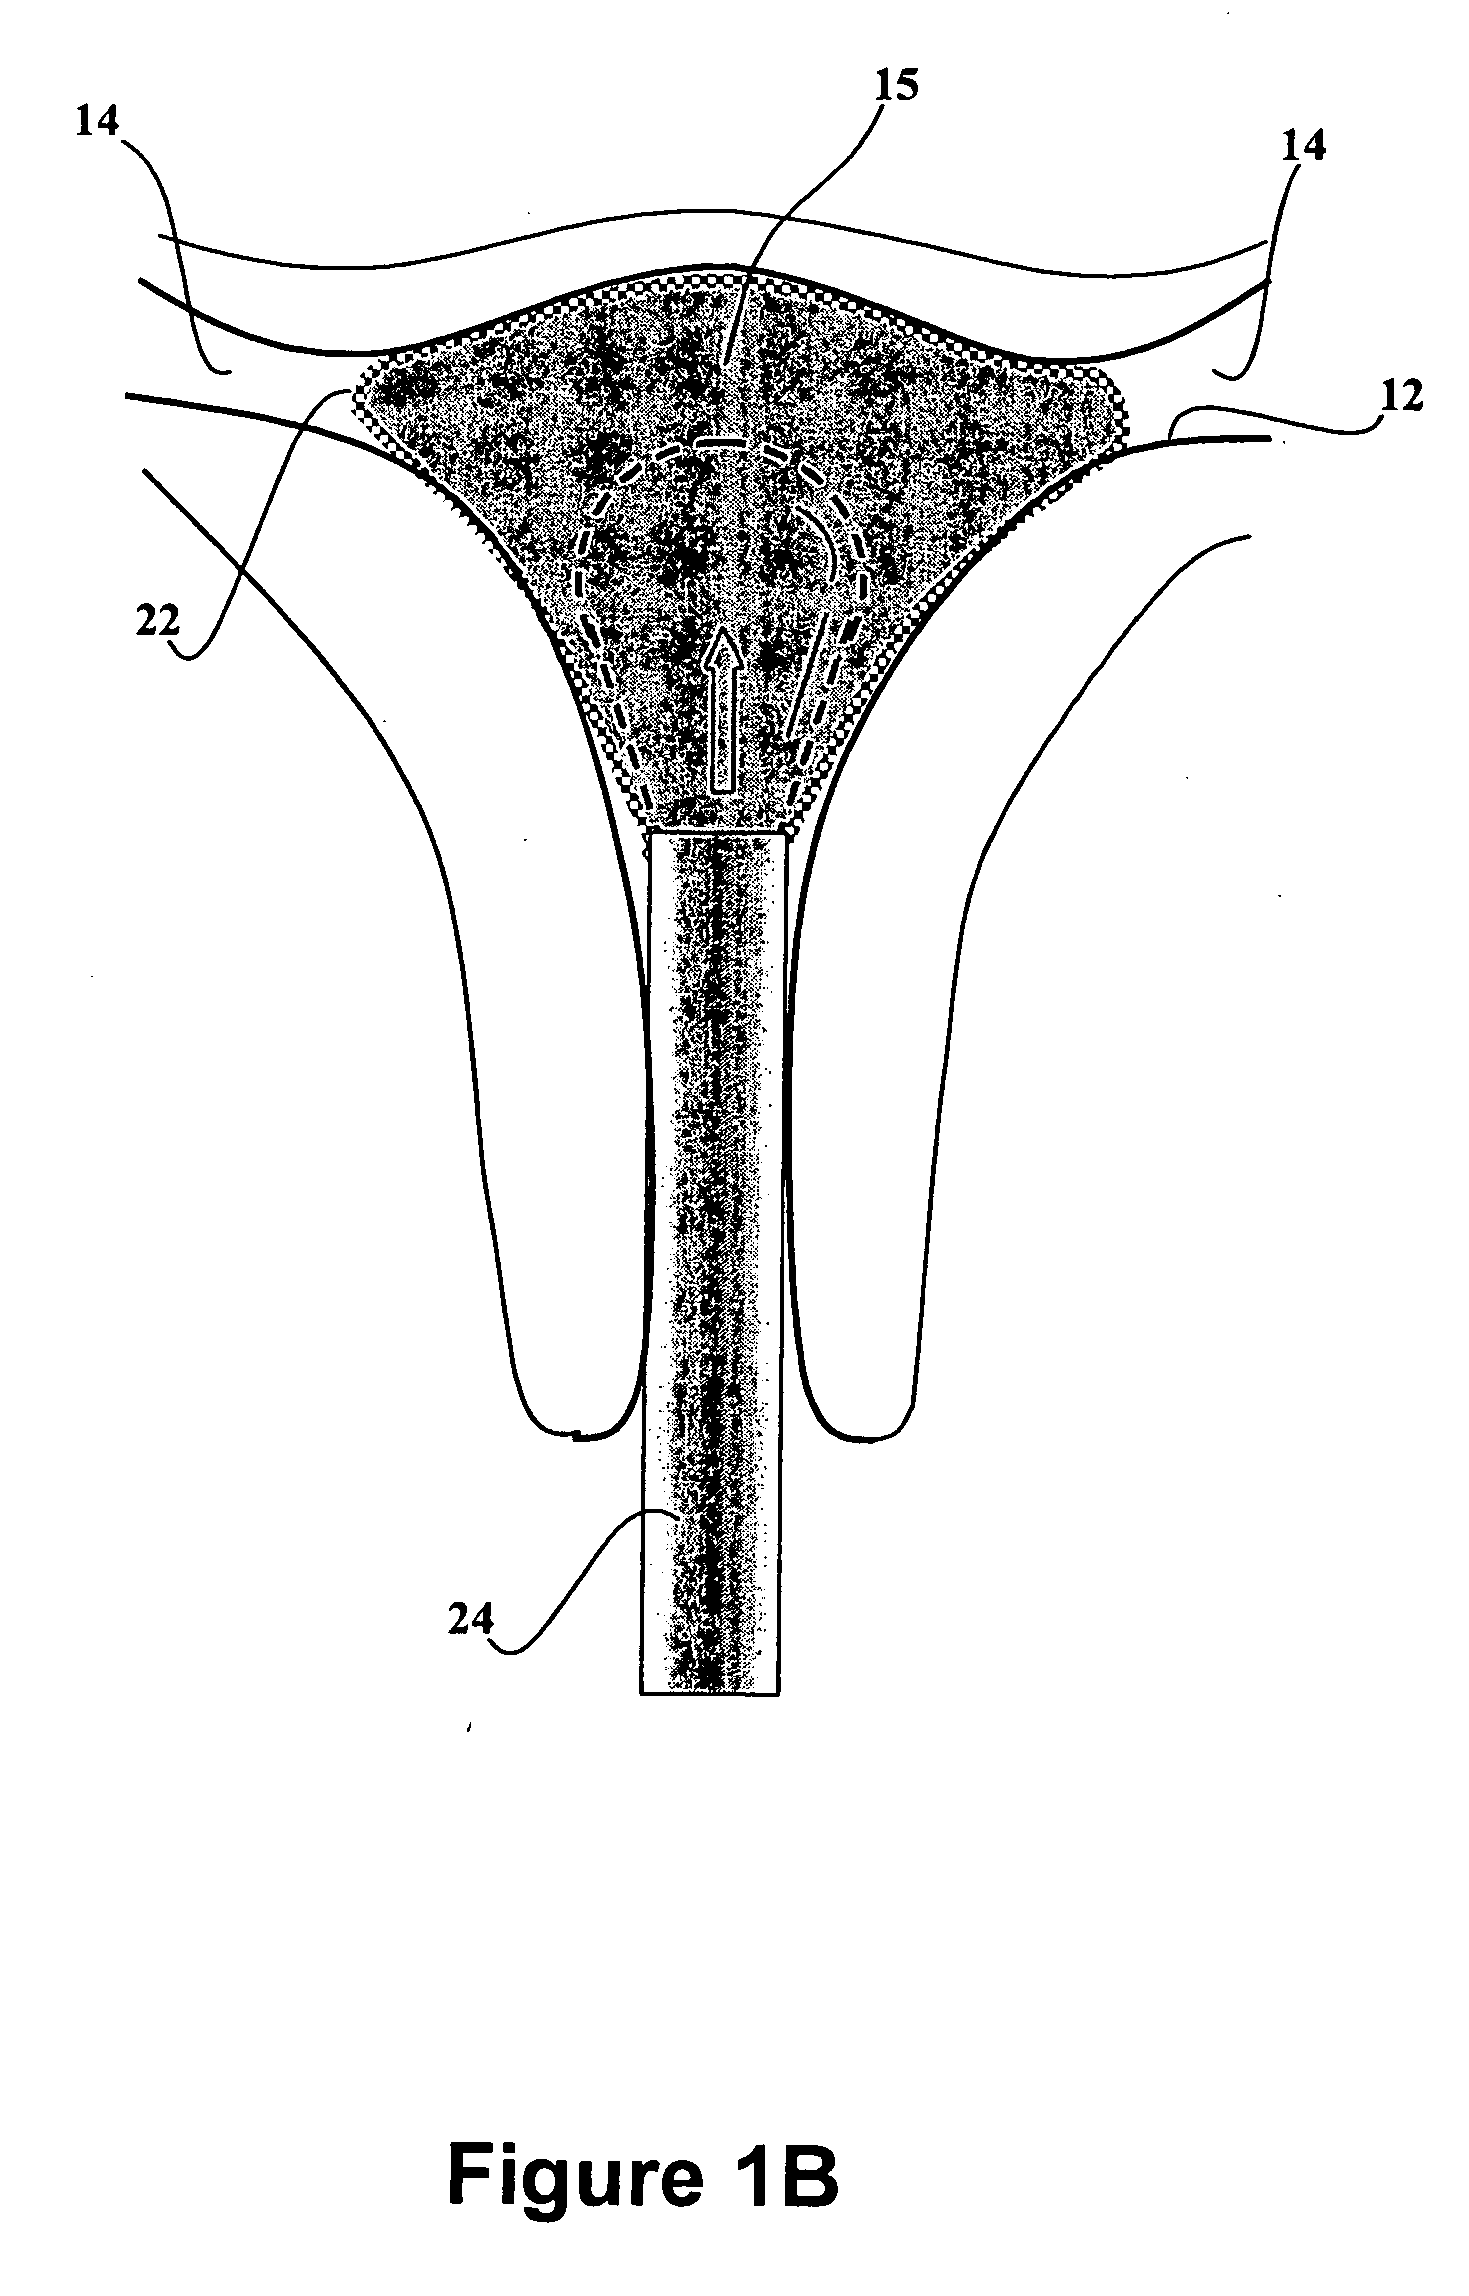 Dip-molded polymeric medical devices with reverse thickness gradient, and methood of making same